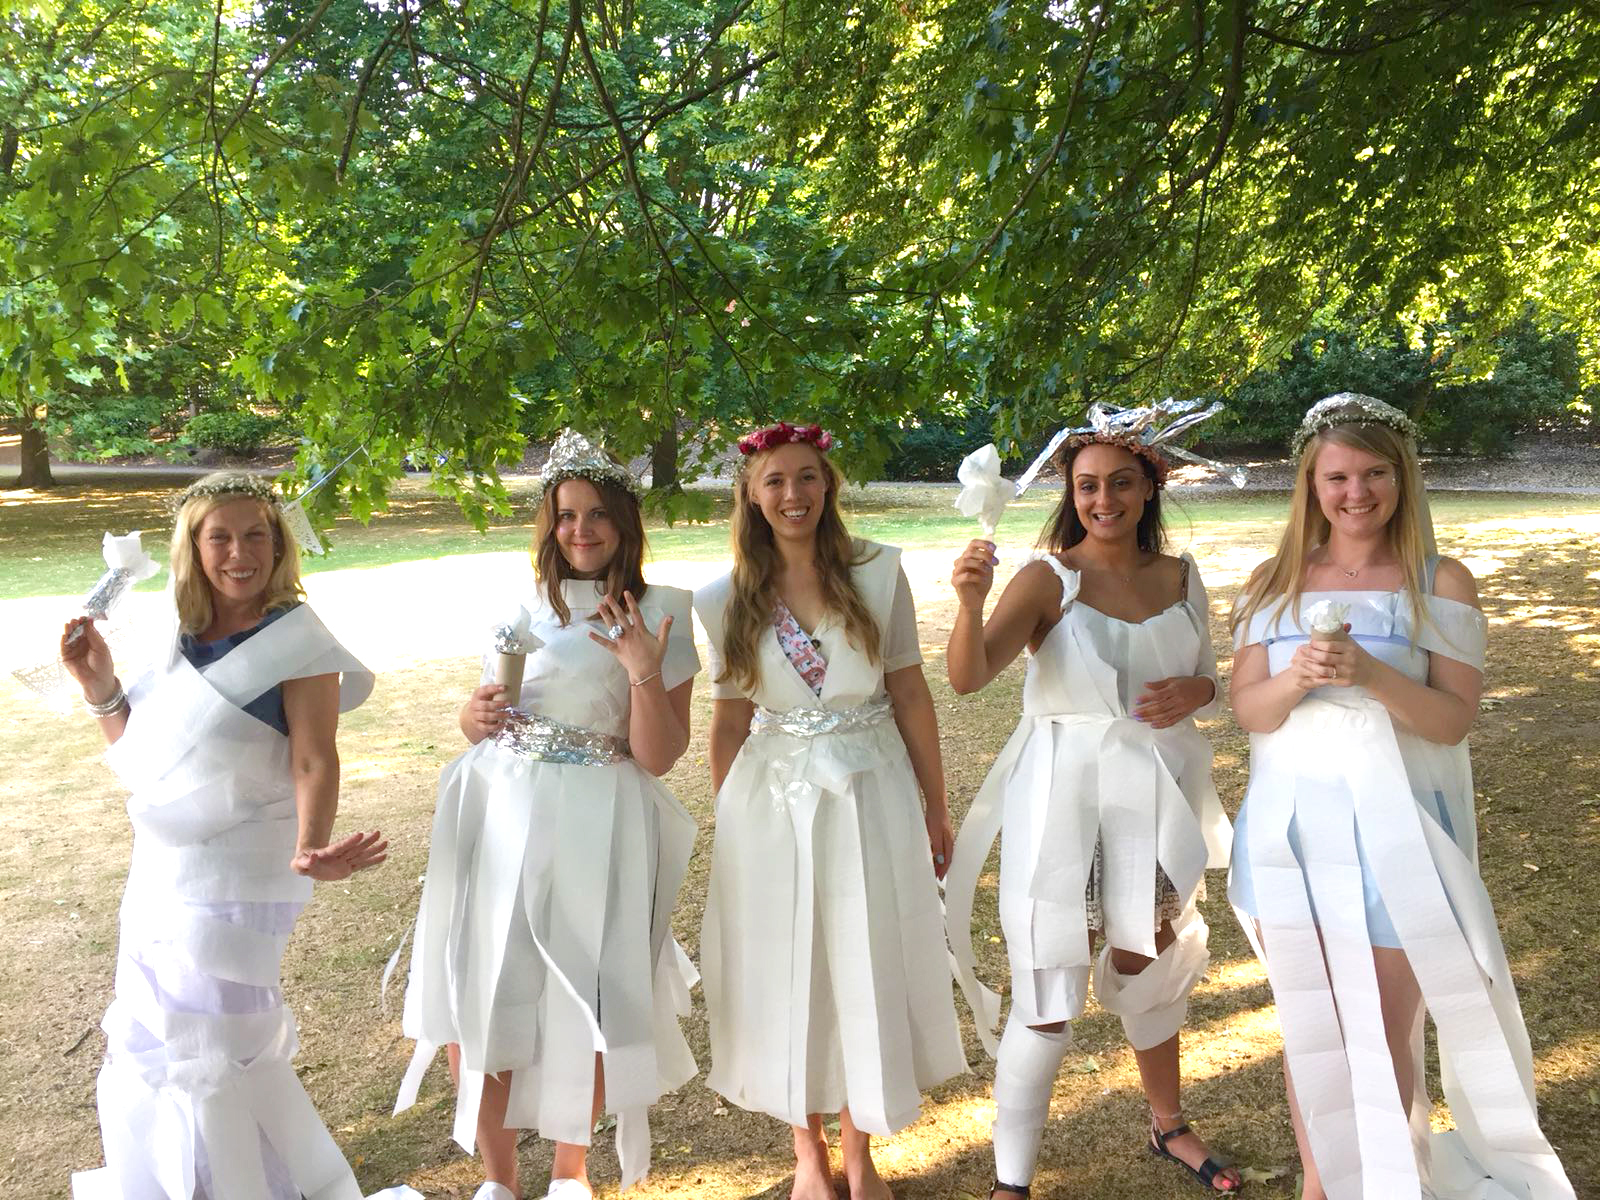 Hen do wedding dress game with dresses made of toilet roll and silver foil.